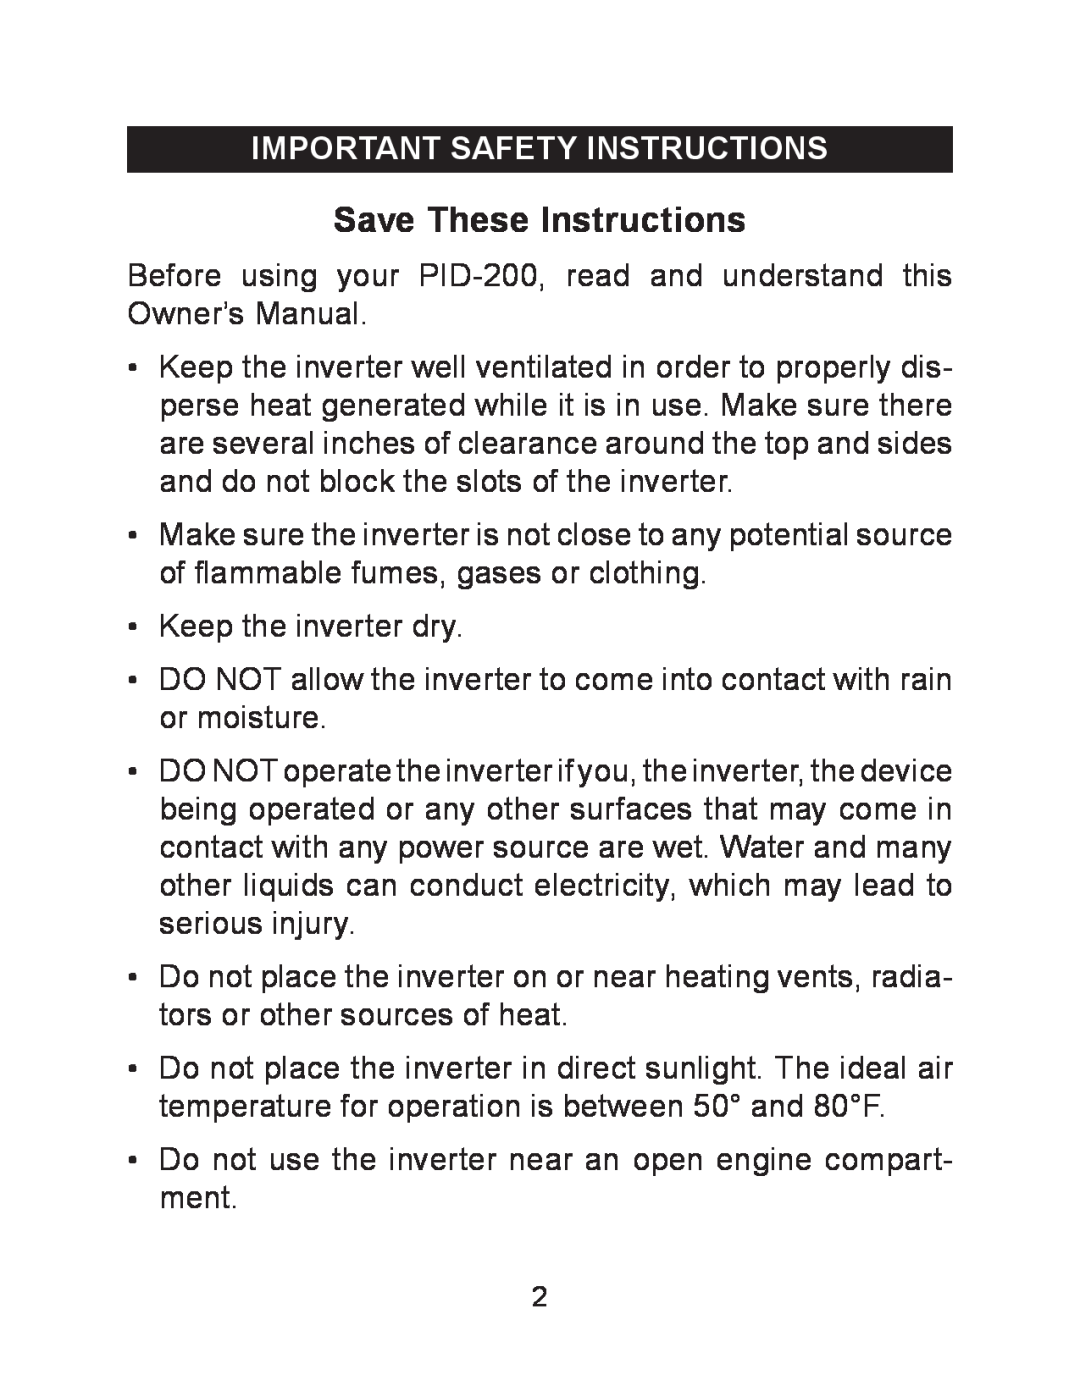 Schumacher PID-200 owner manual Save These Instructions, Important Safety Instructions 